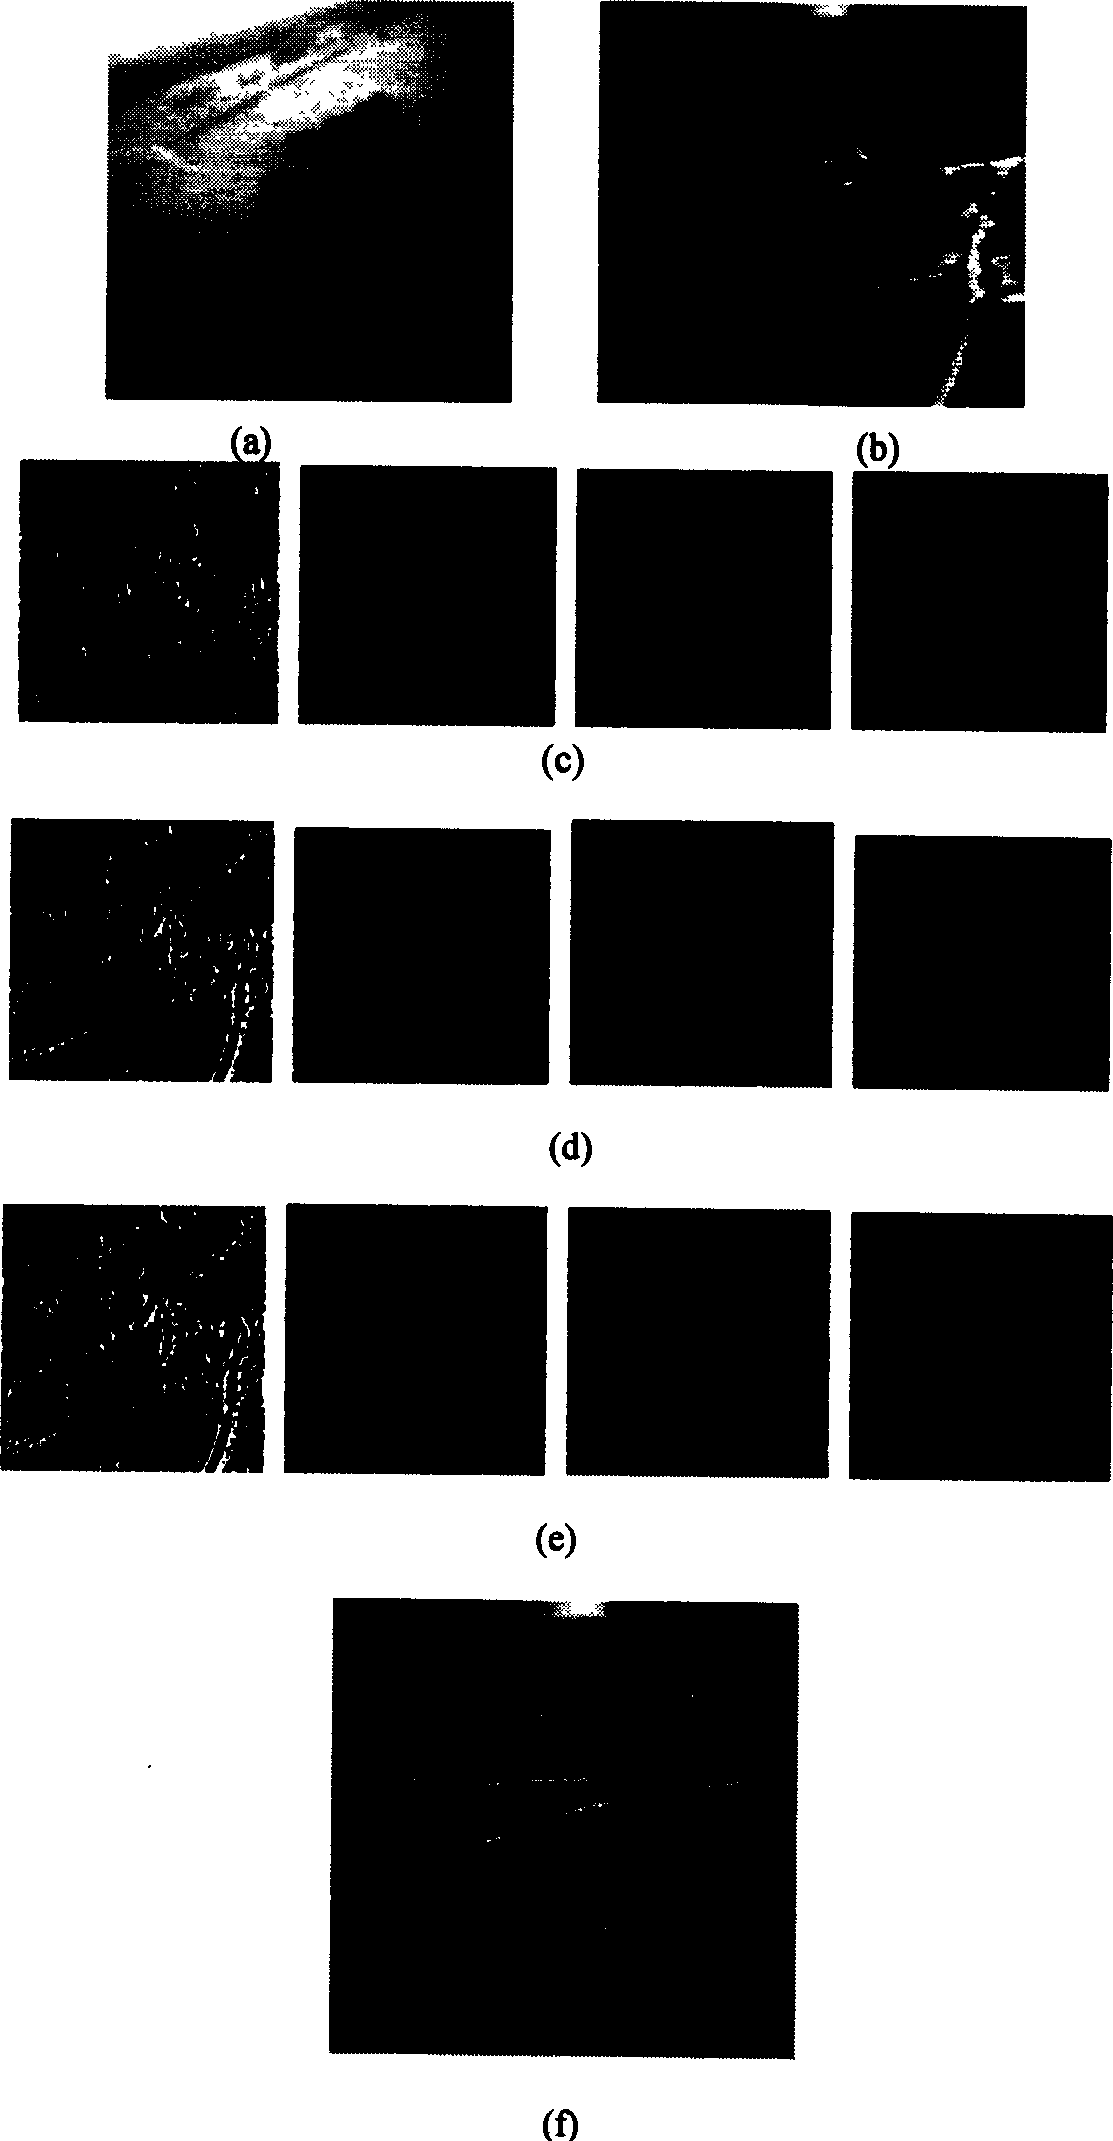 Pyramid image merging method being integrated with edge and texture information